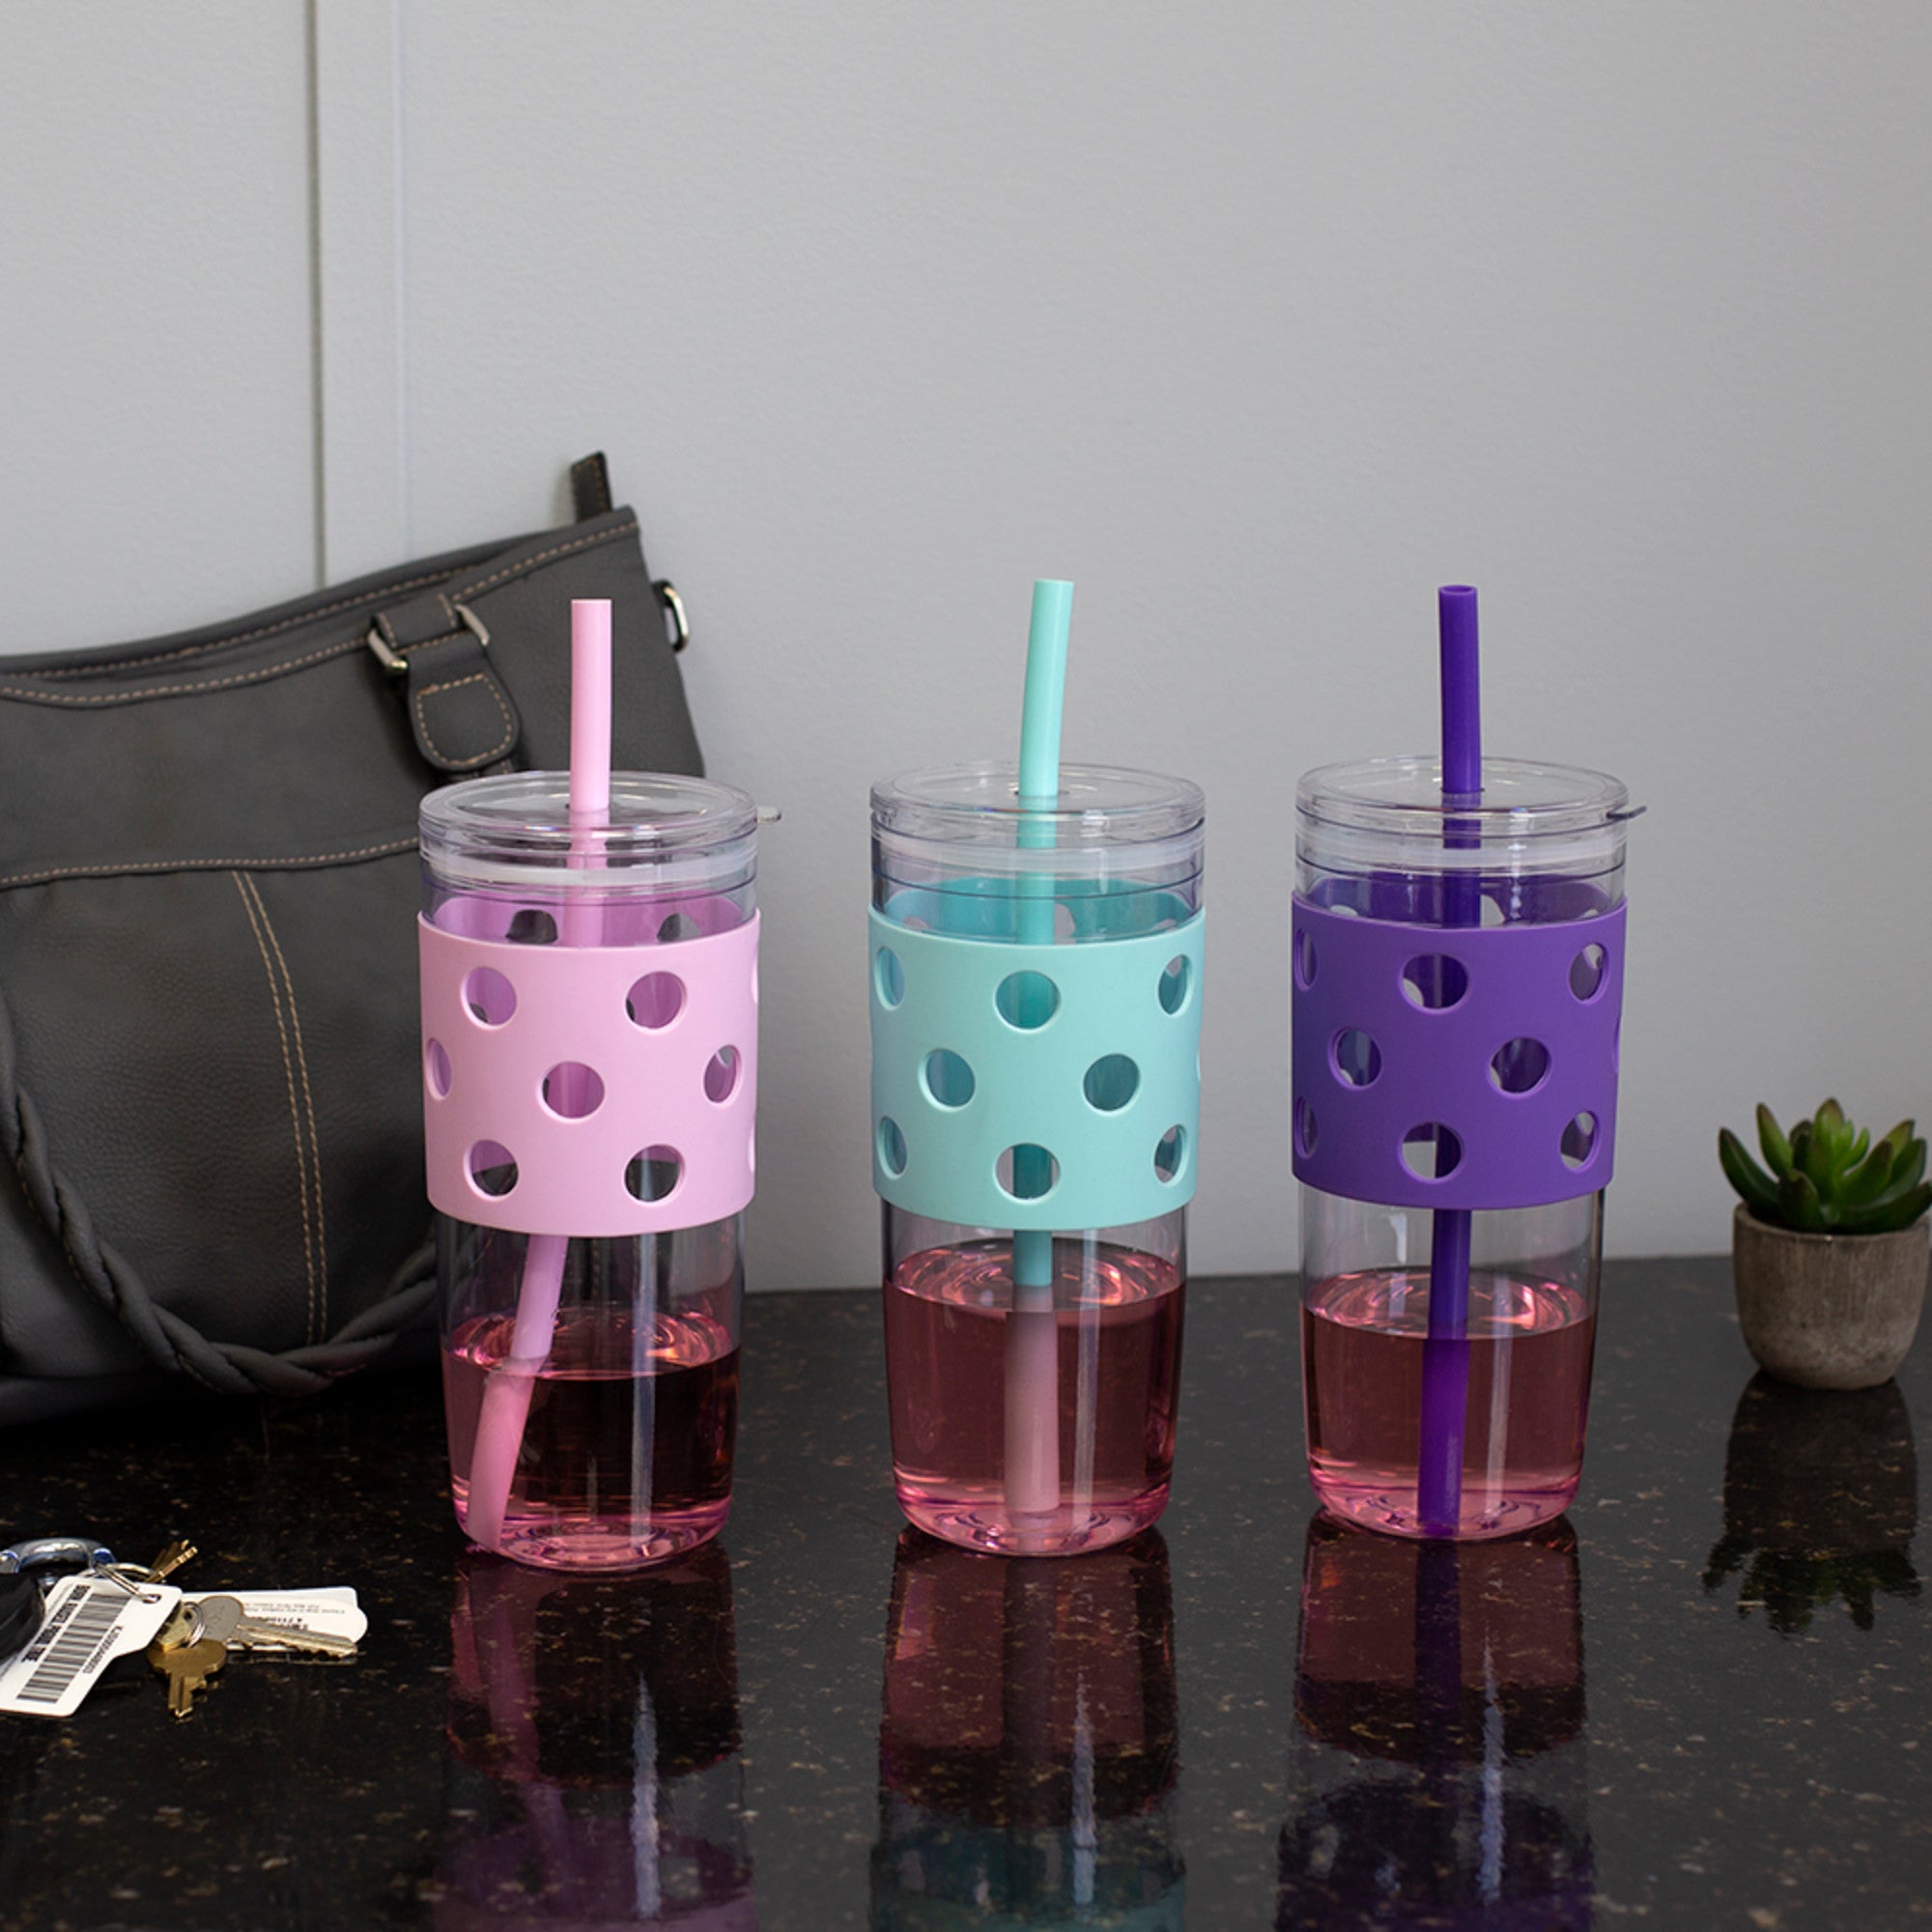 Home Basics Dots 28 oz. Plastic Tumbler with Straw - Assorted Colors